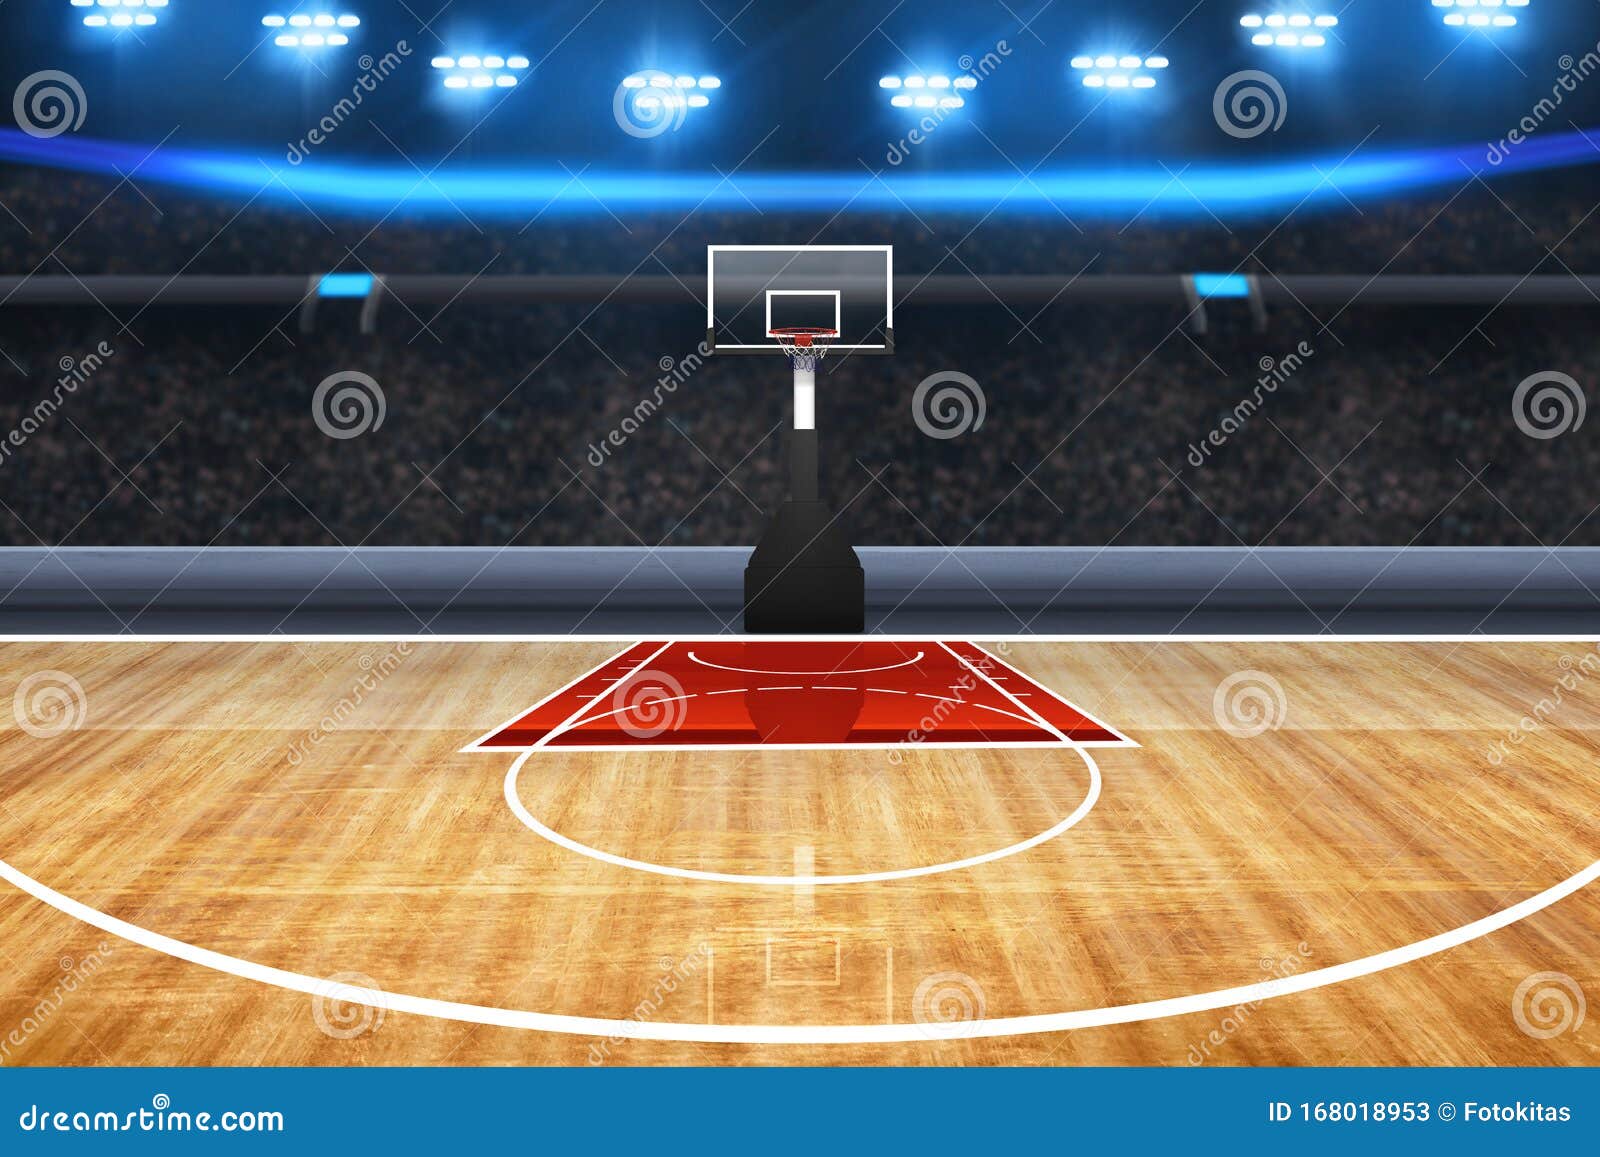 professional basketball court arena backgrounds